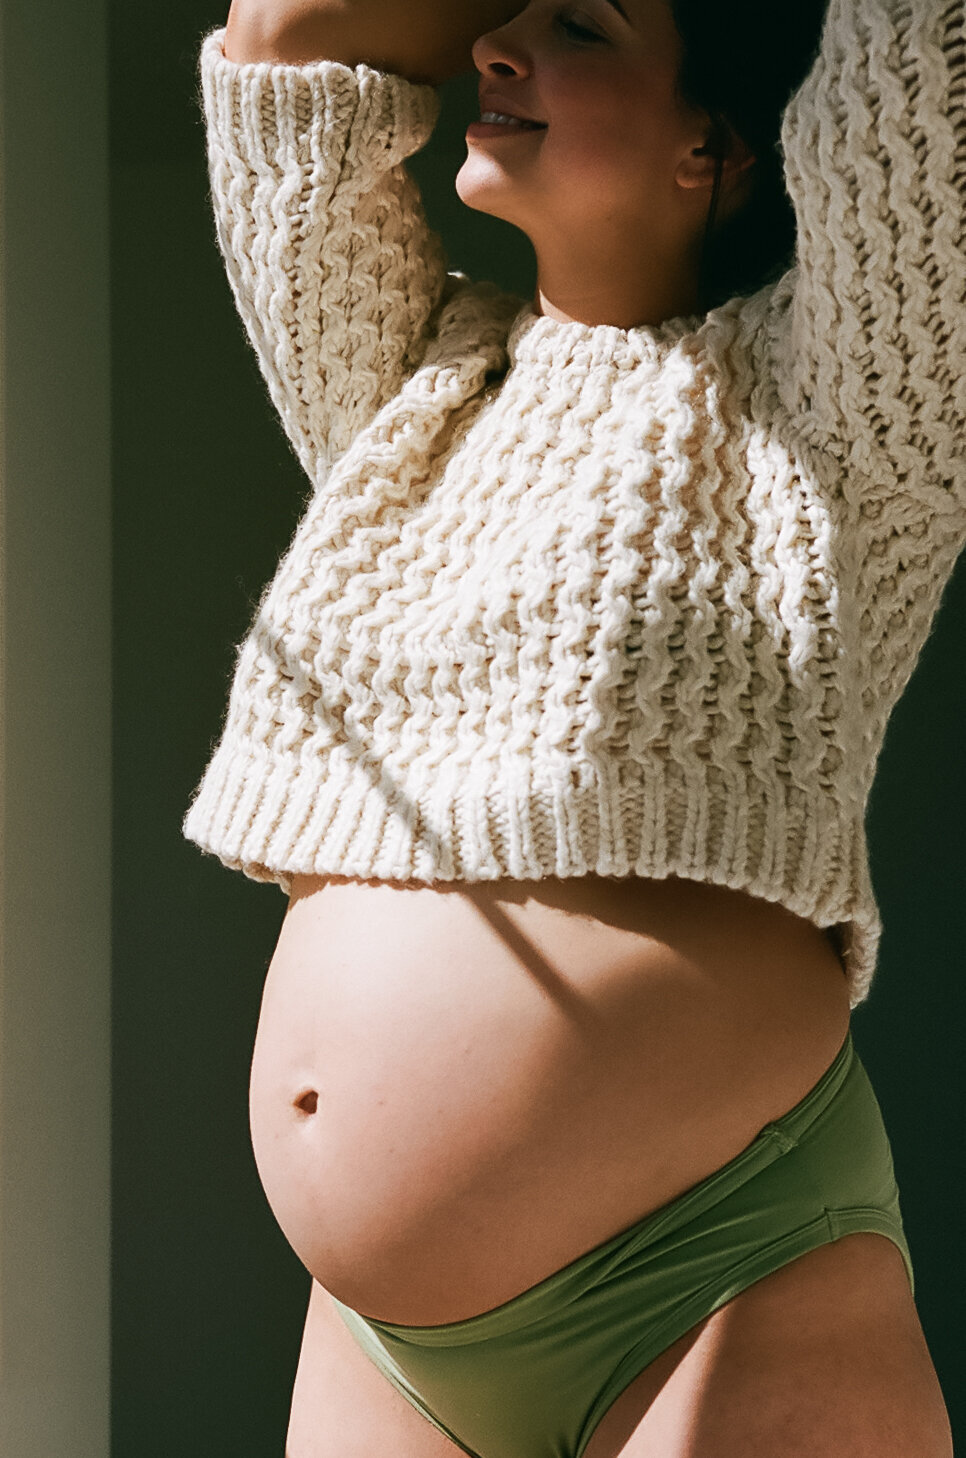 Meredith-Green-Photography-maternity_0027